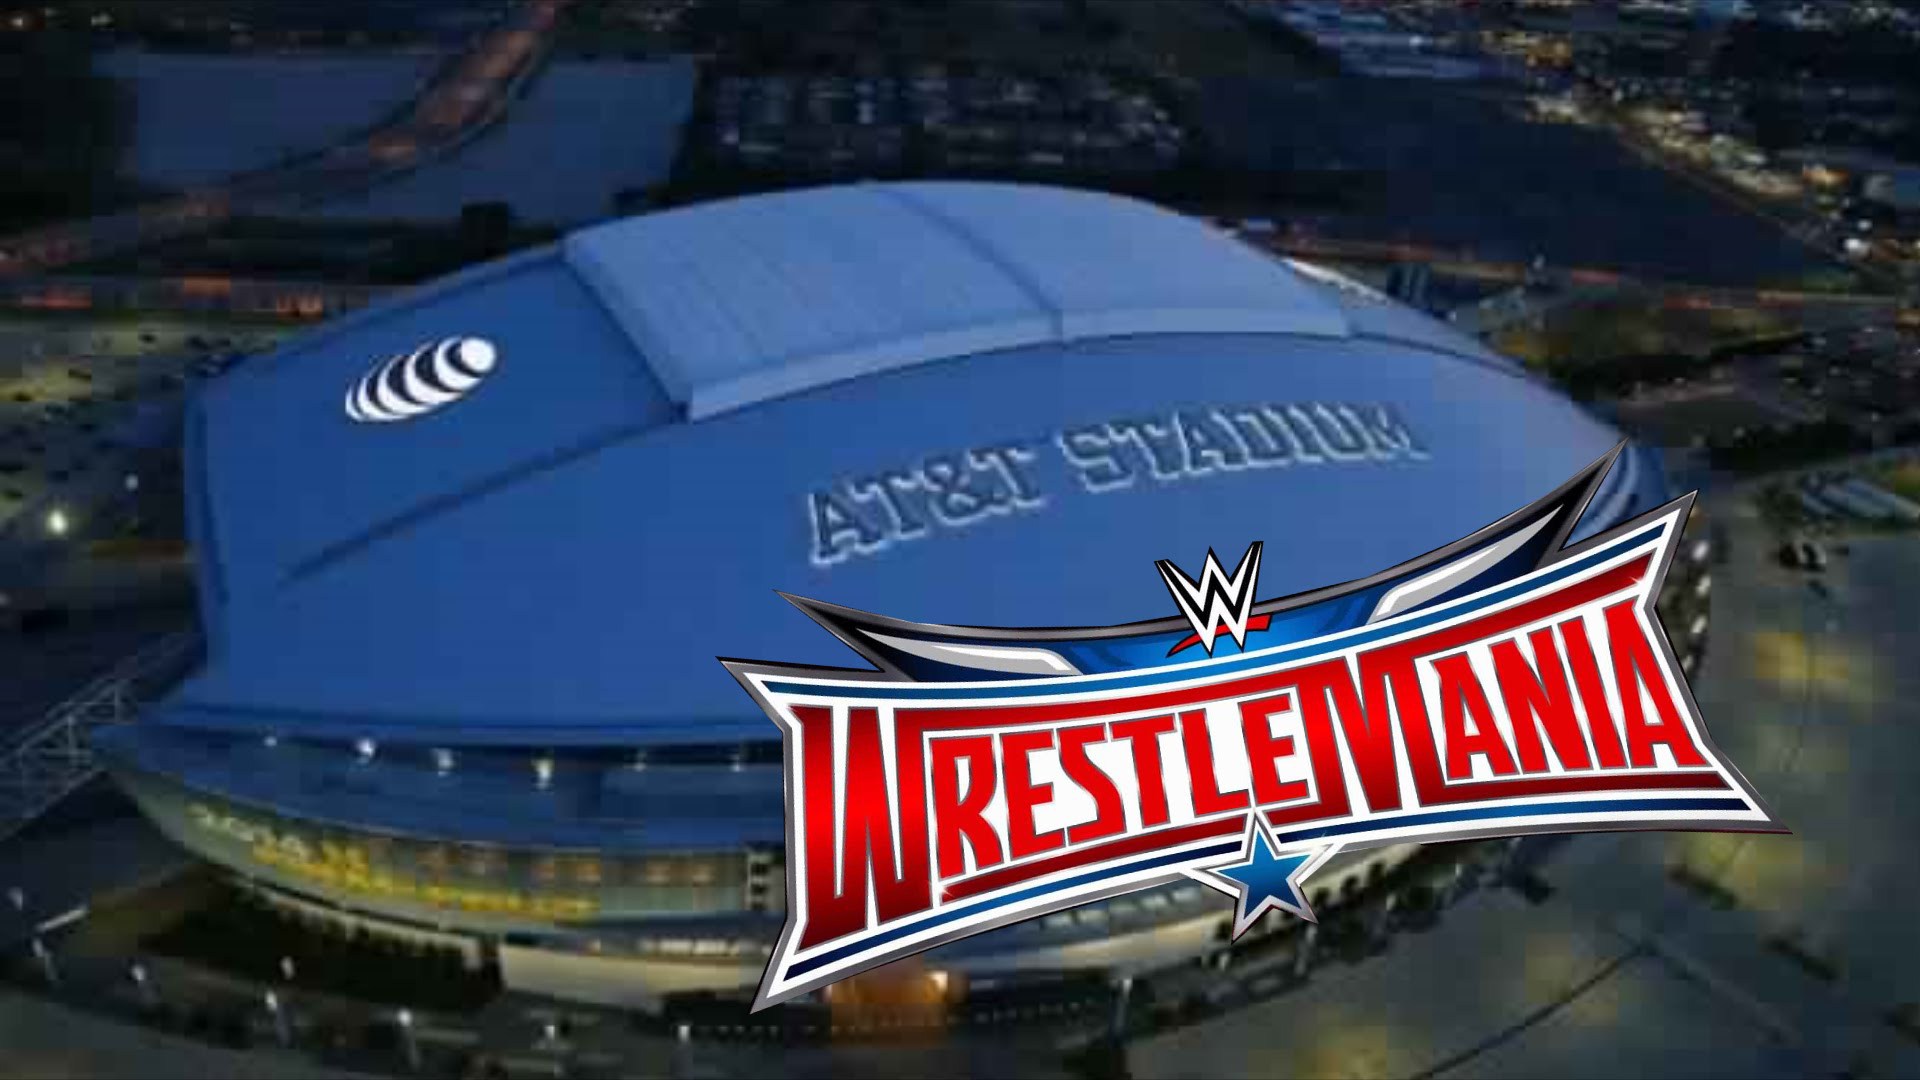 Wrestlemania 32 Tickets On Sale Today Orlando Fun and Food